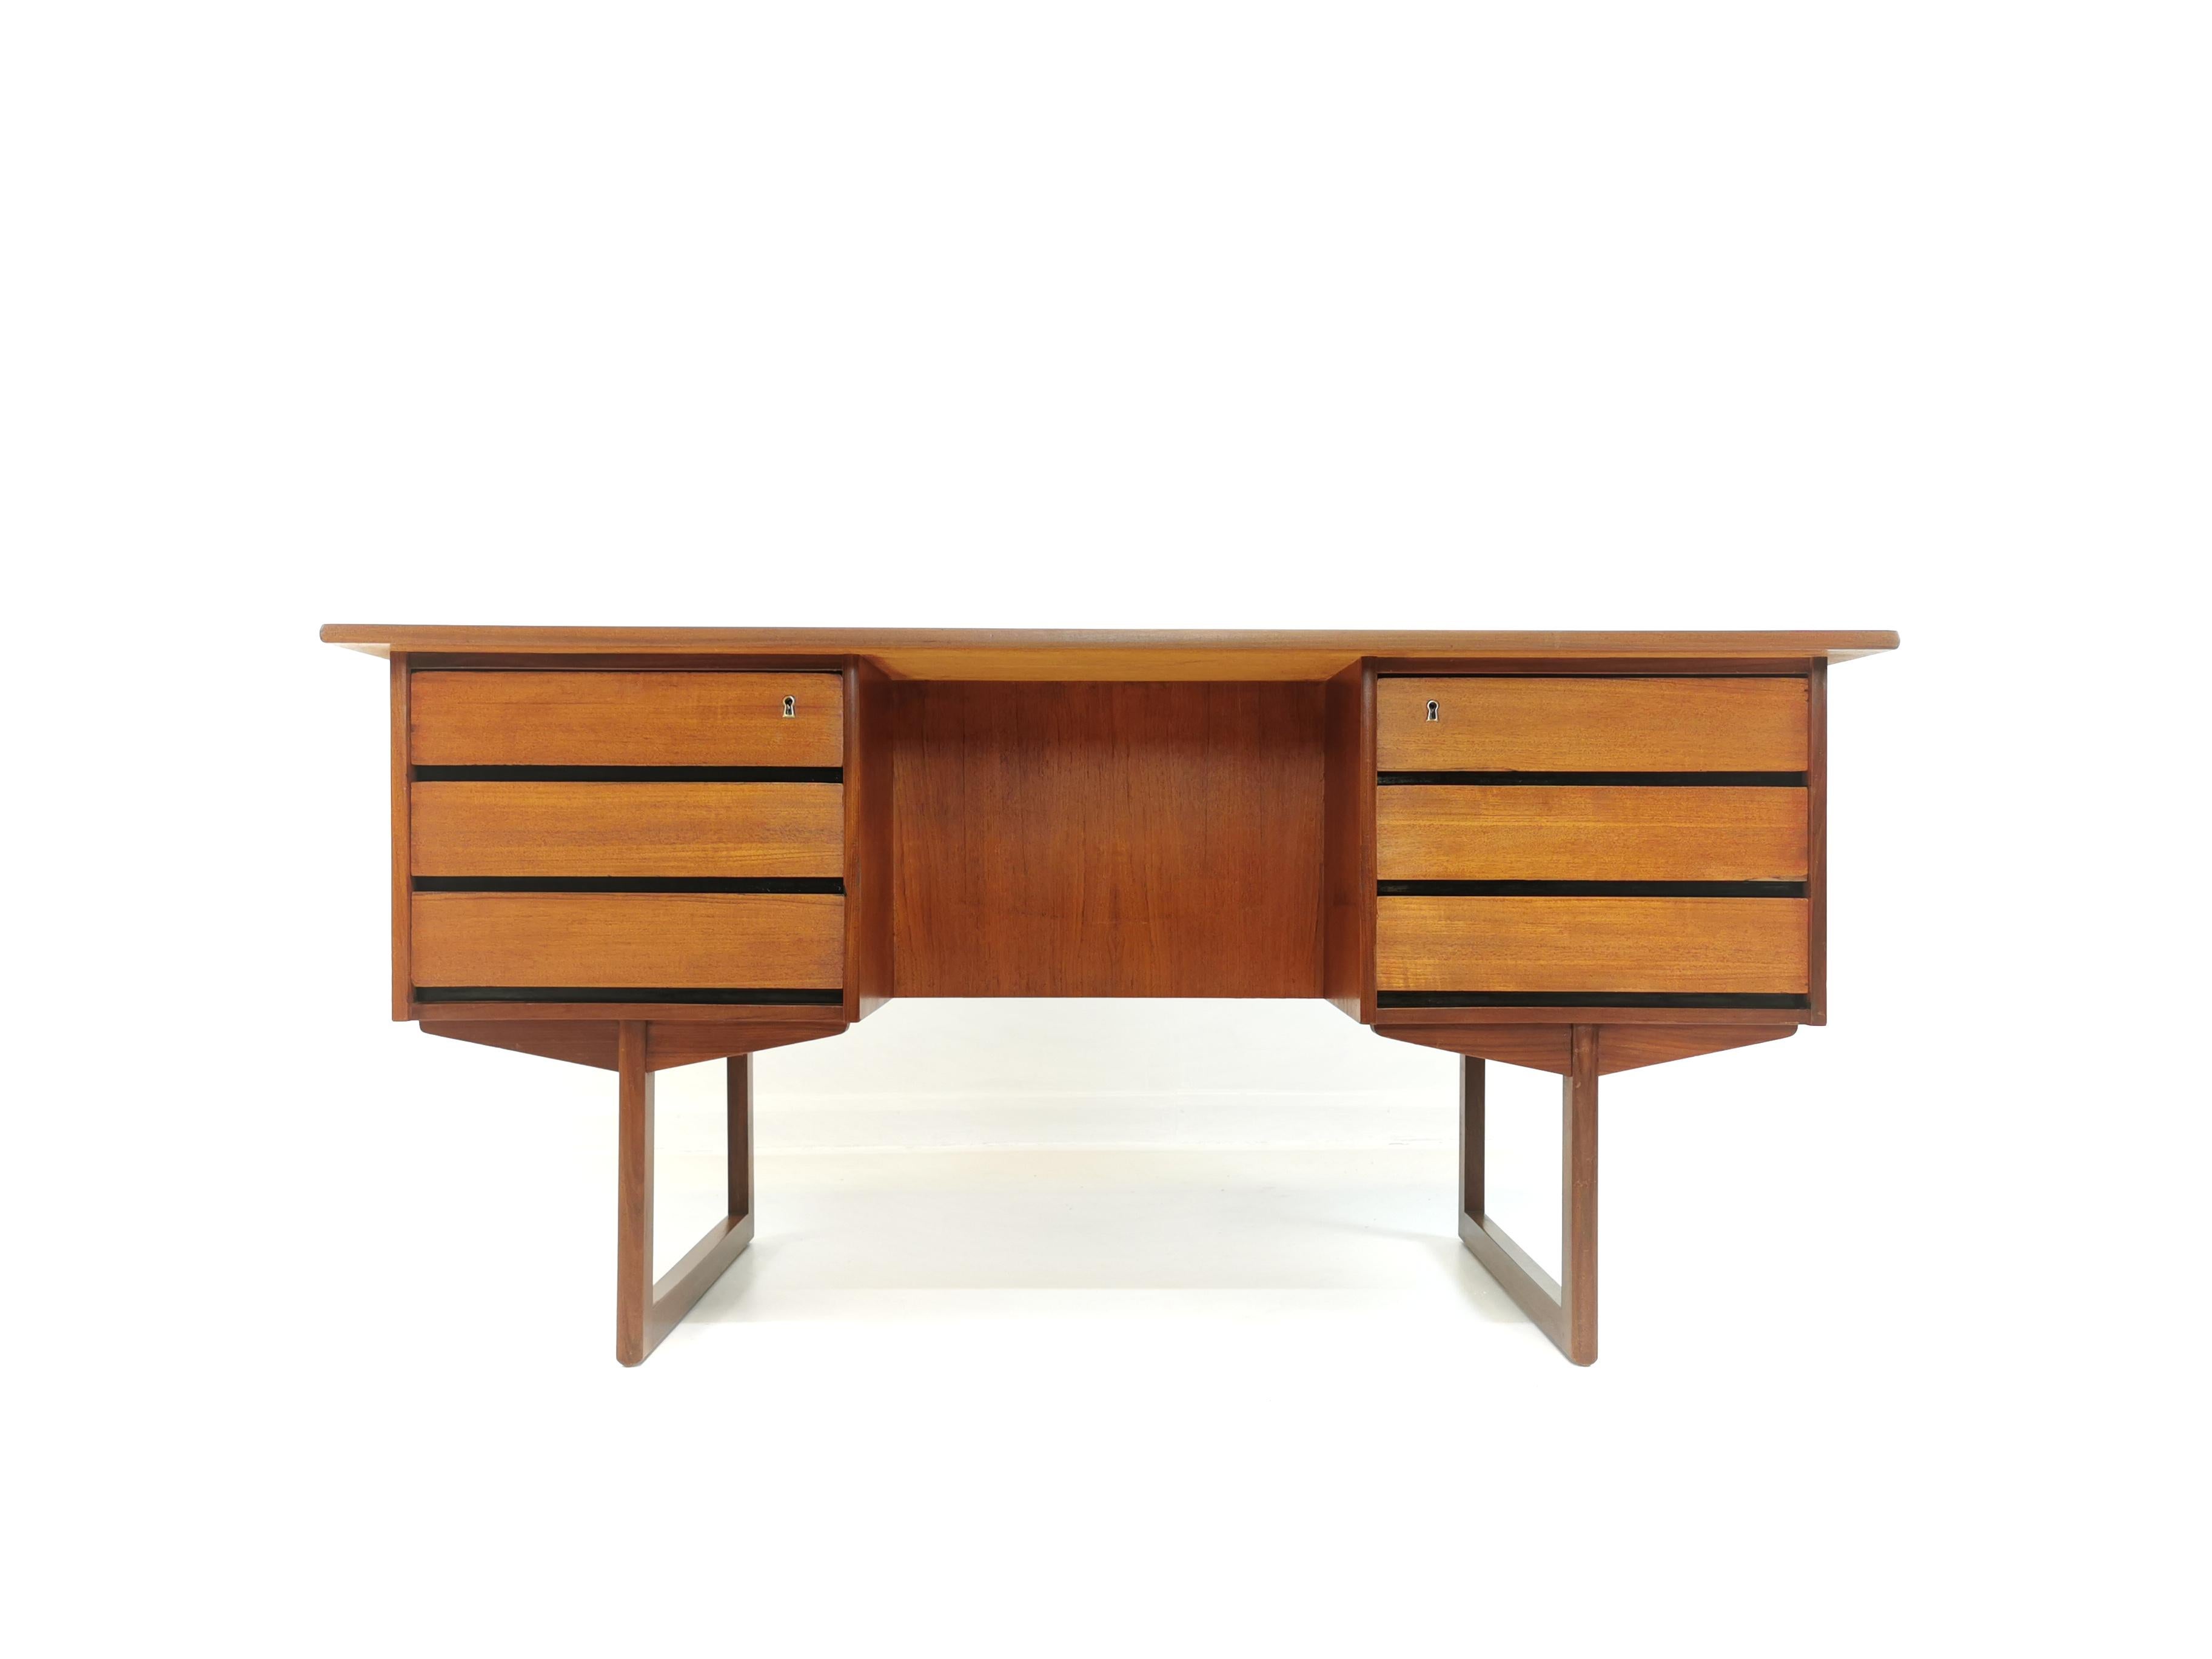 A very stylish Danish desk from the 1960s.

Twin pedestal. Very sleek and minimal design.

Also has a finished back so it can be placed in the centre of a room.